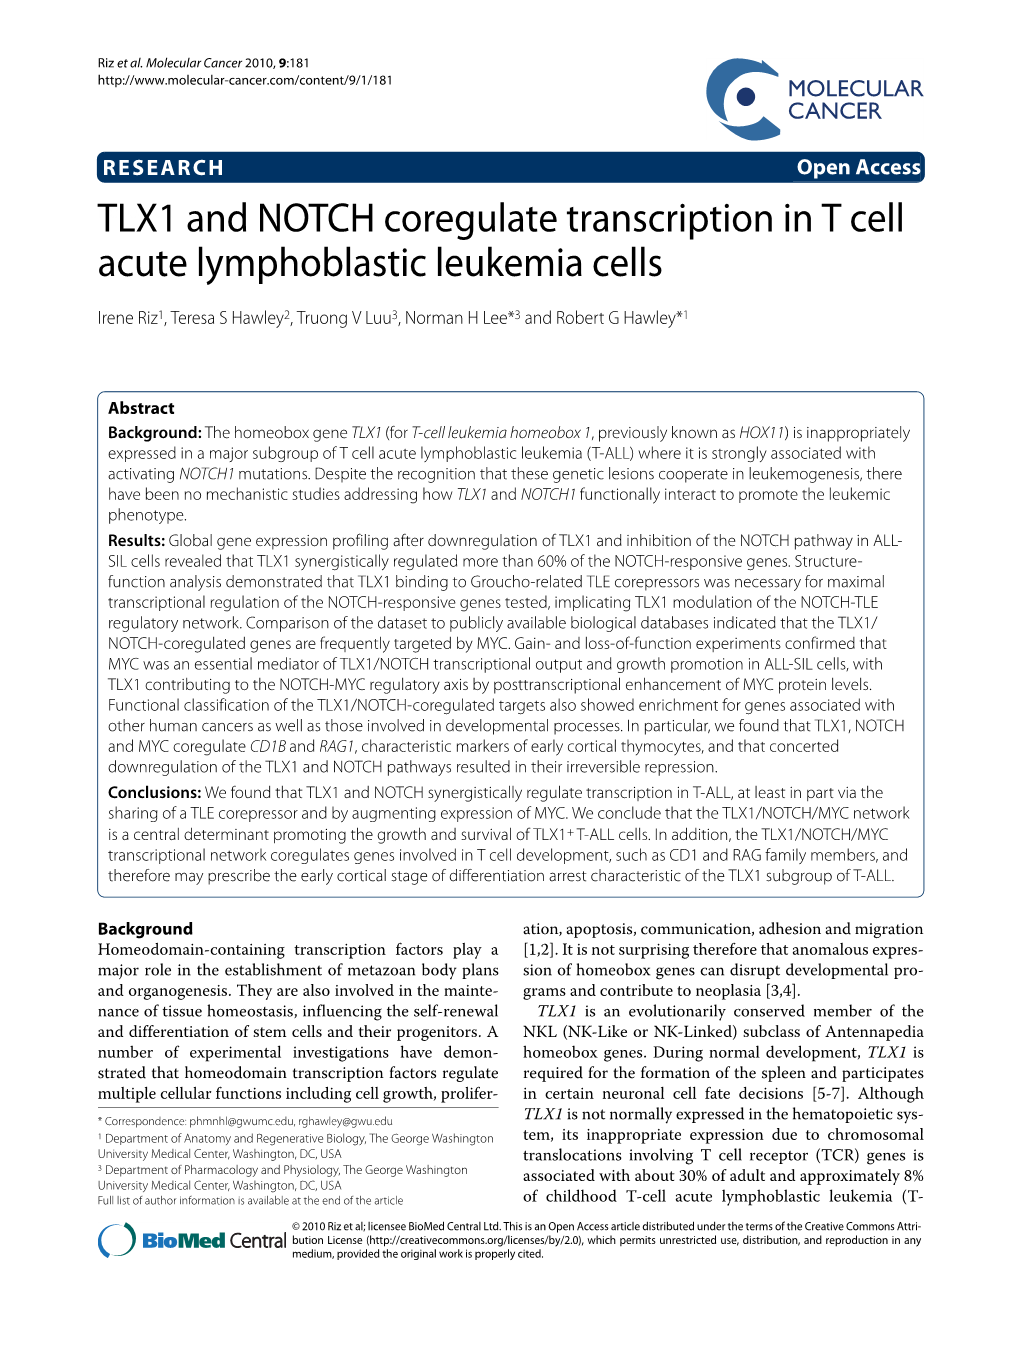 TLX1 and NOTCH Coregulate Transcription in T Cell Acute Lymphoblastic Leukemia Cells Molecular Cancer 2010, 9:181